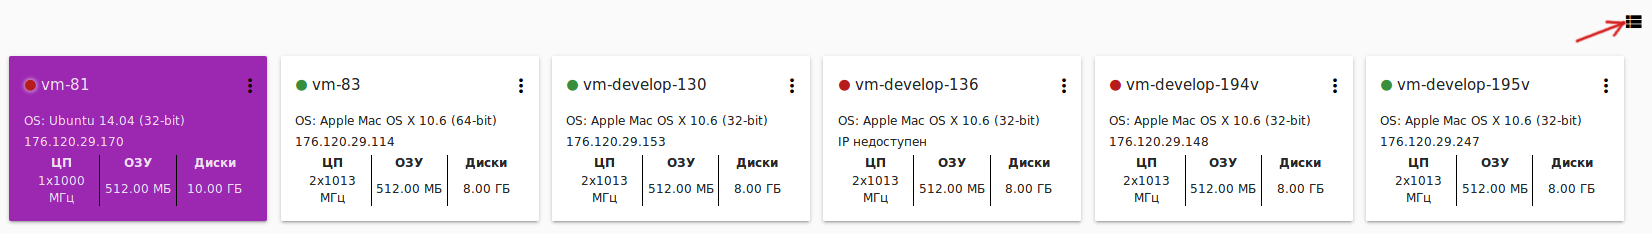 _images/RU_VMs_BoxView.png